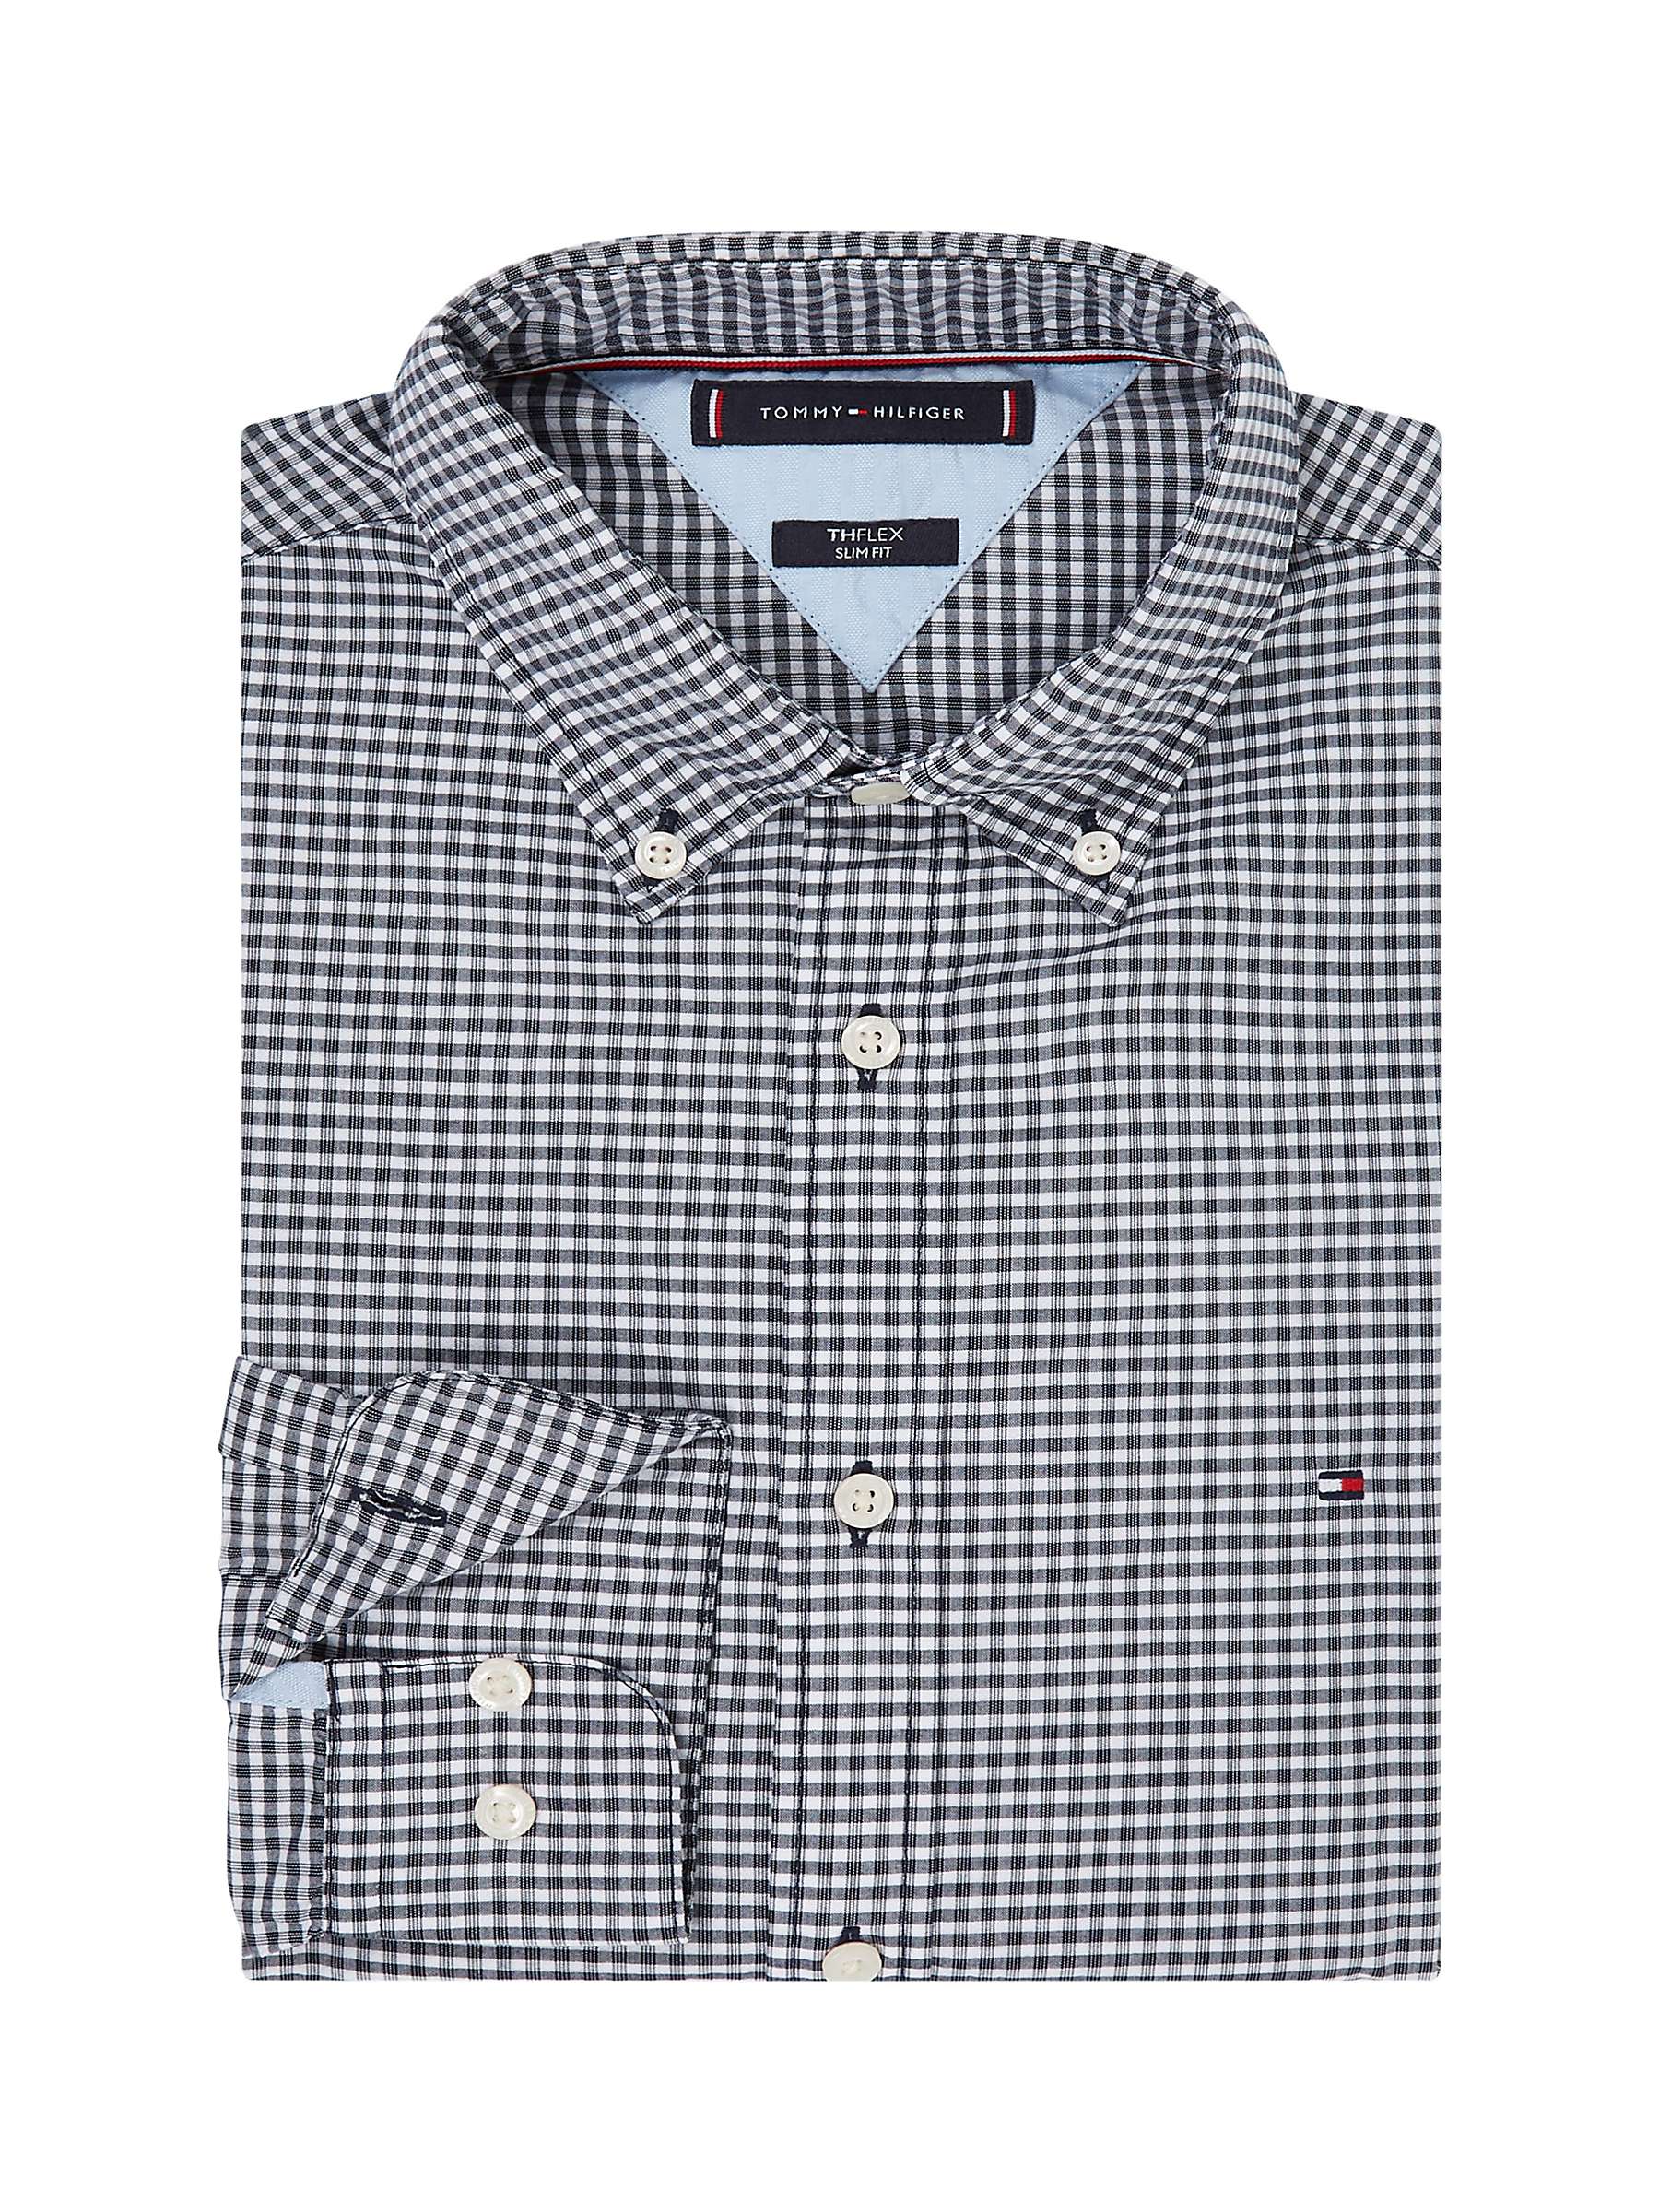 Buy Tommy Hilfiger B&T Textured Gingham Shirt, Navy/White Online at johnlewis.com